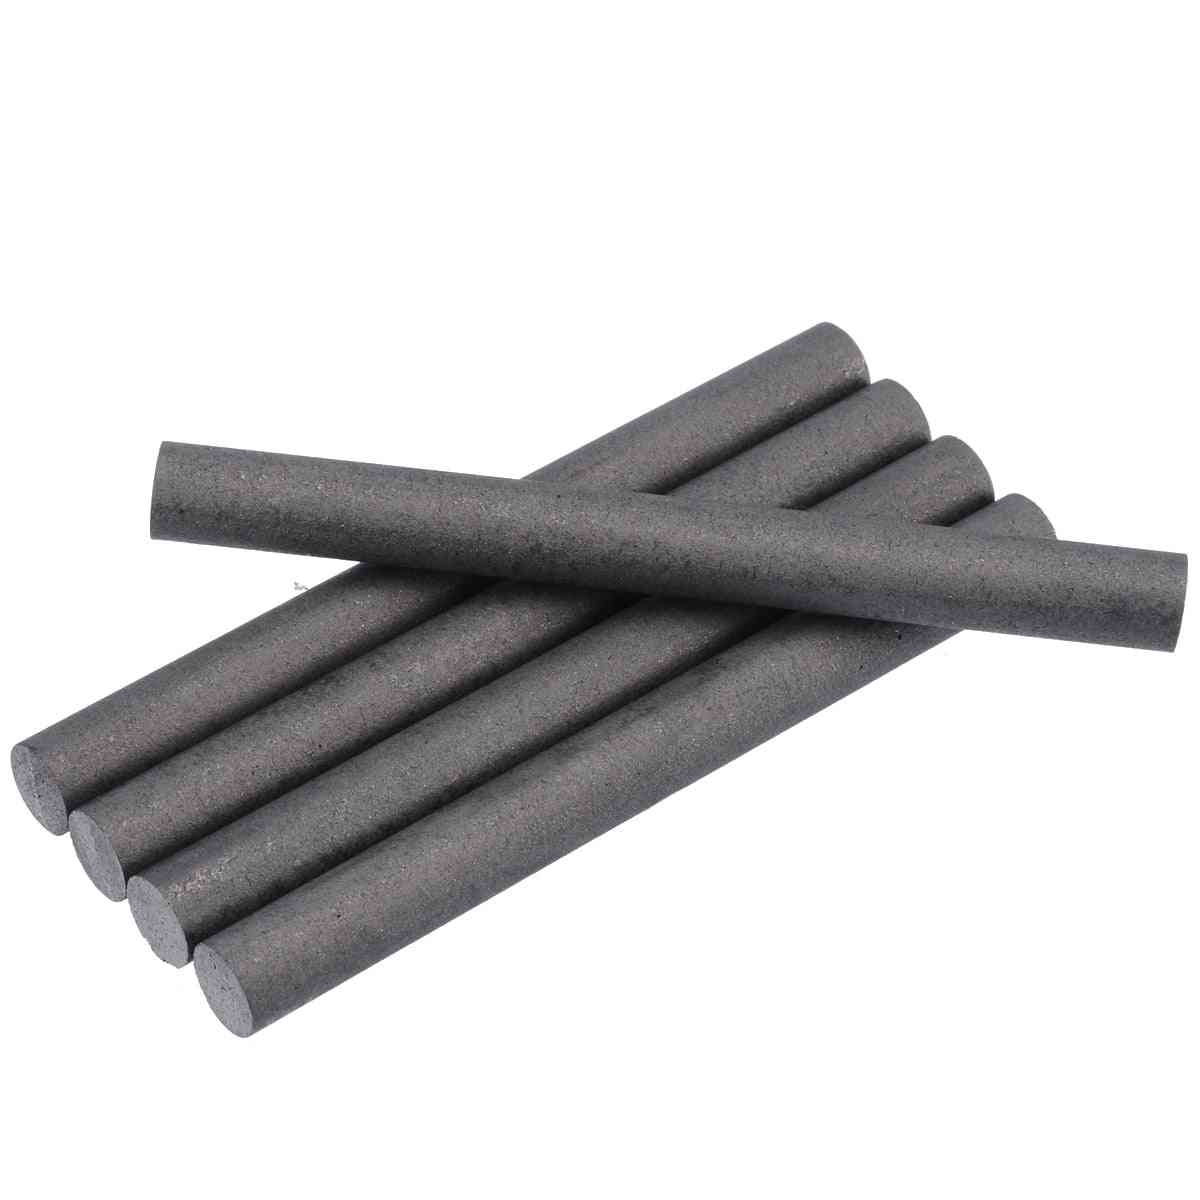 5pcs Graphite Electrode Mayitr Carbon Rods, Cylinder Rods Bars Industry Tools